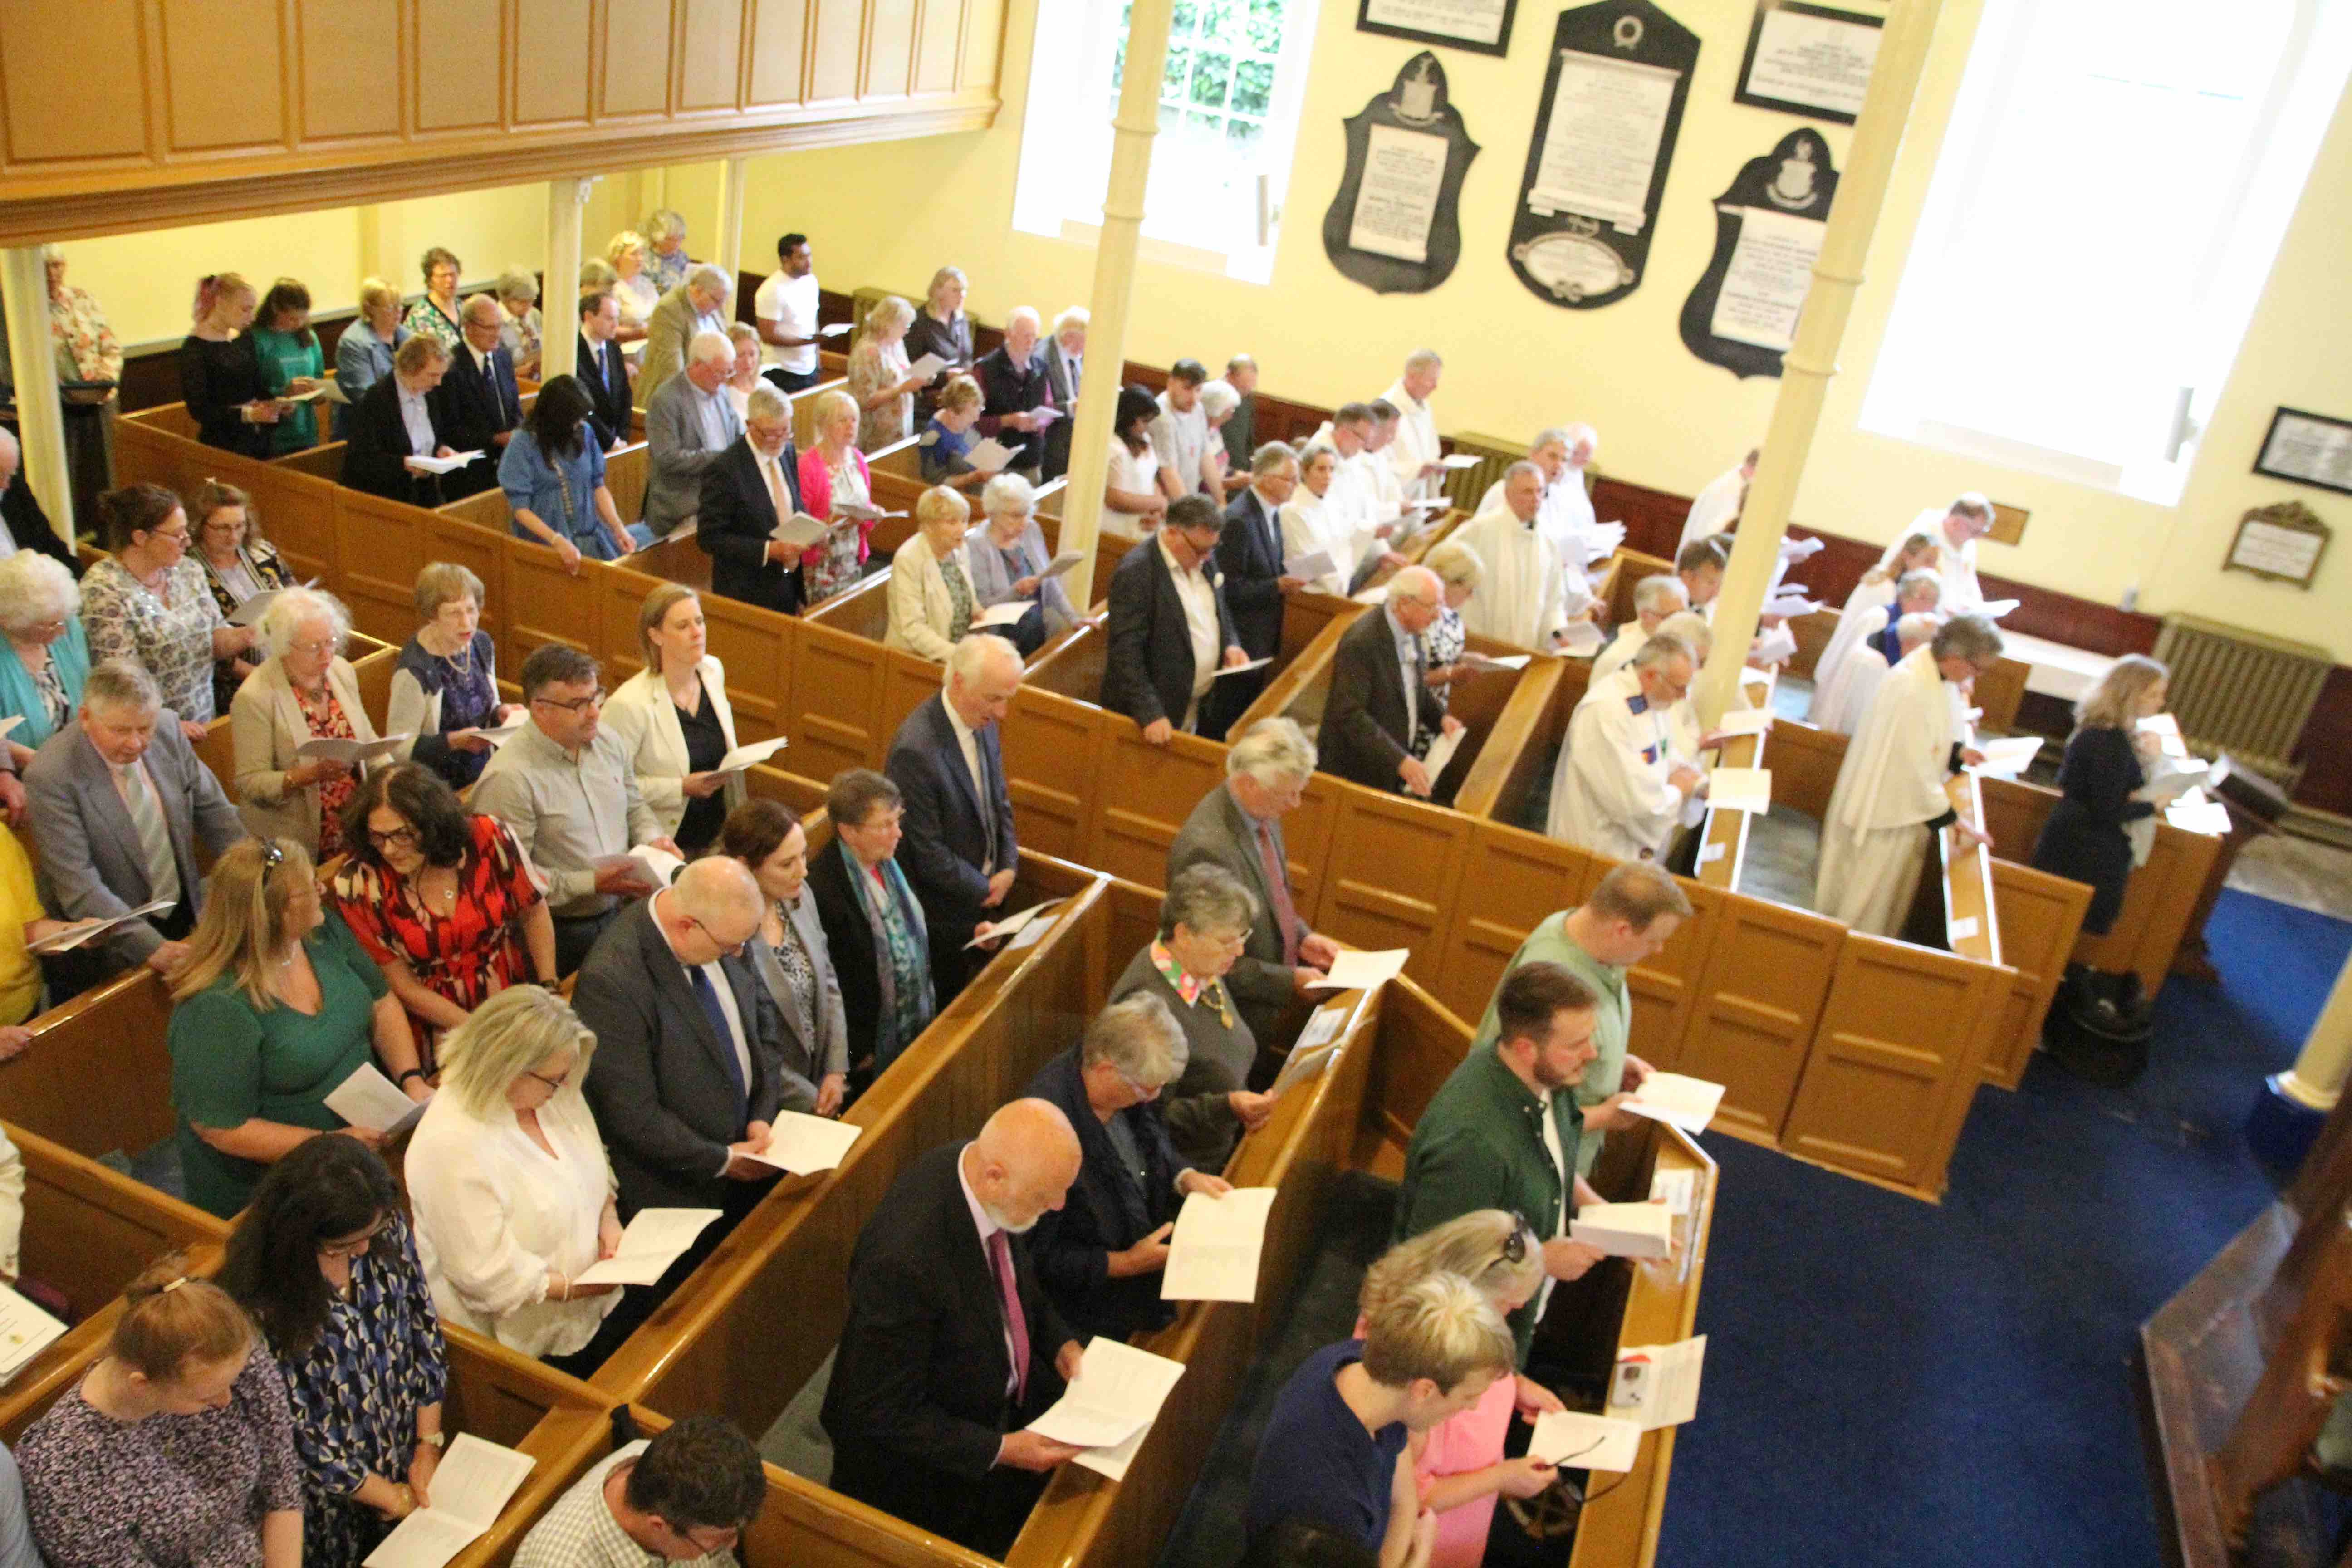 A section of the congregation in St Brigid's Church.